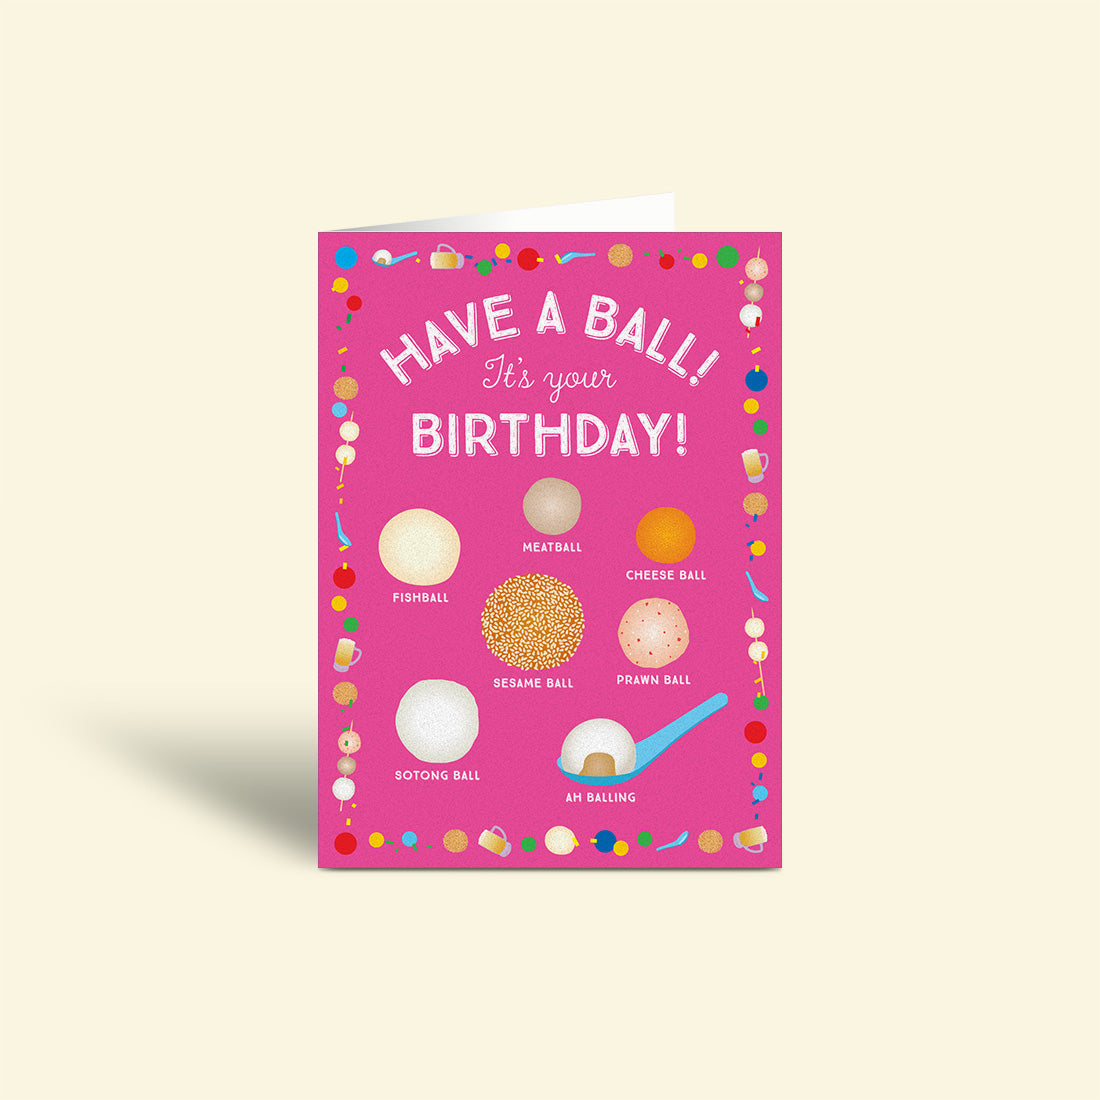 Birthday Cards – Have a Ball